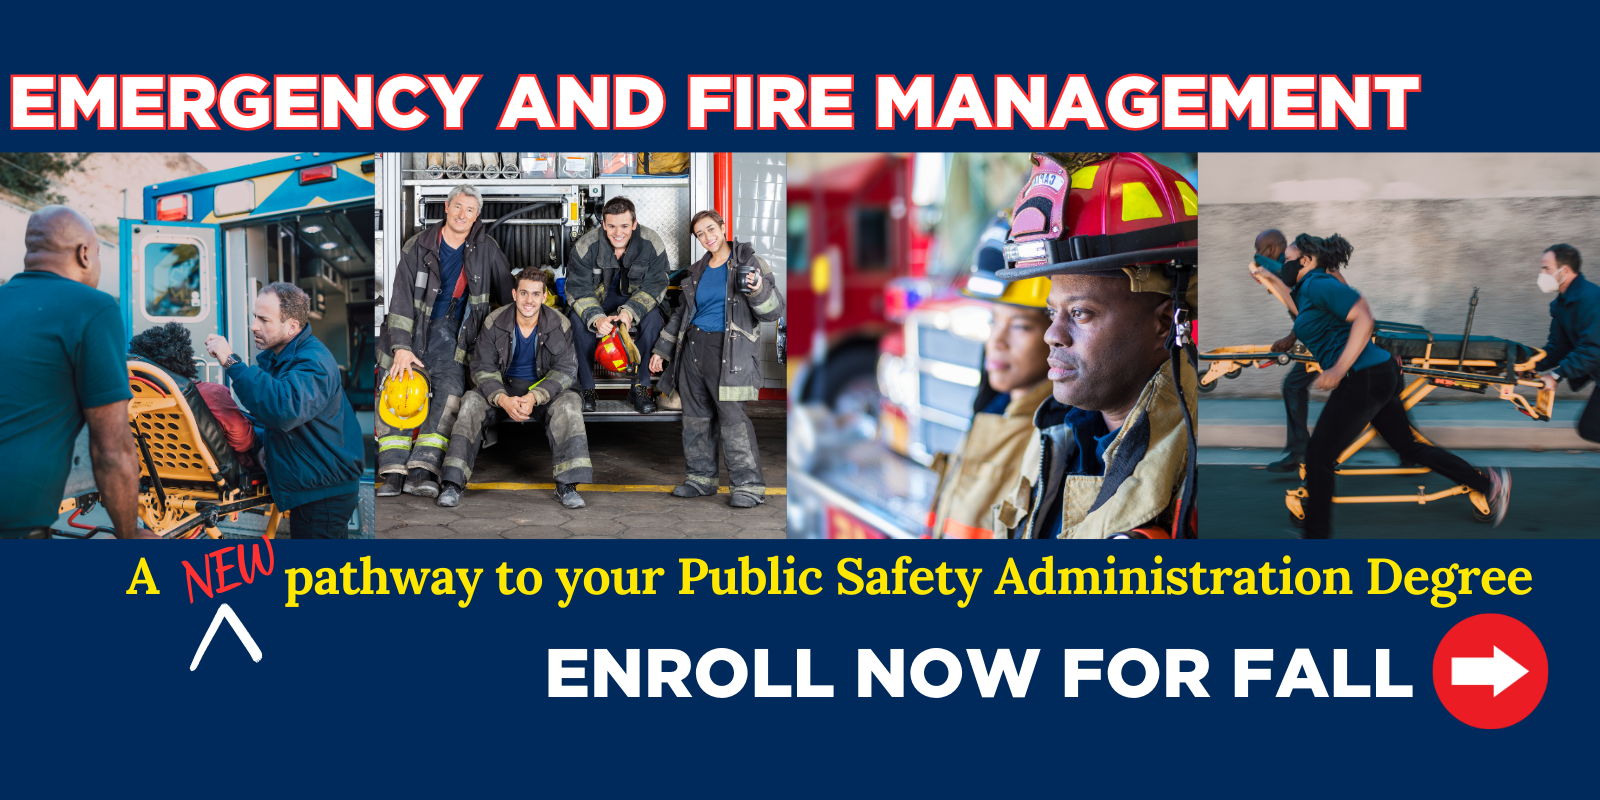 Emergency and Fire Management Degree images